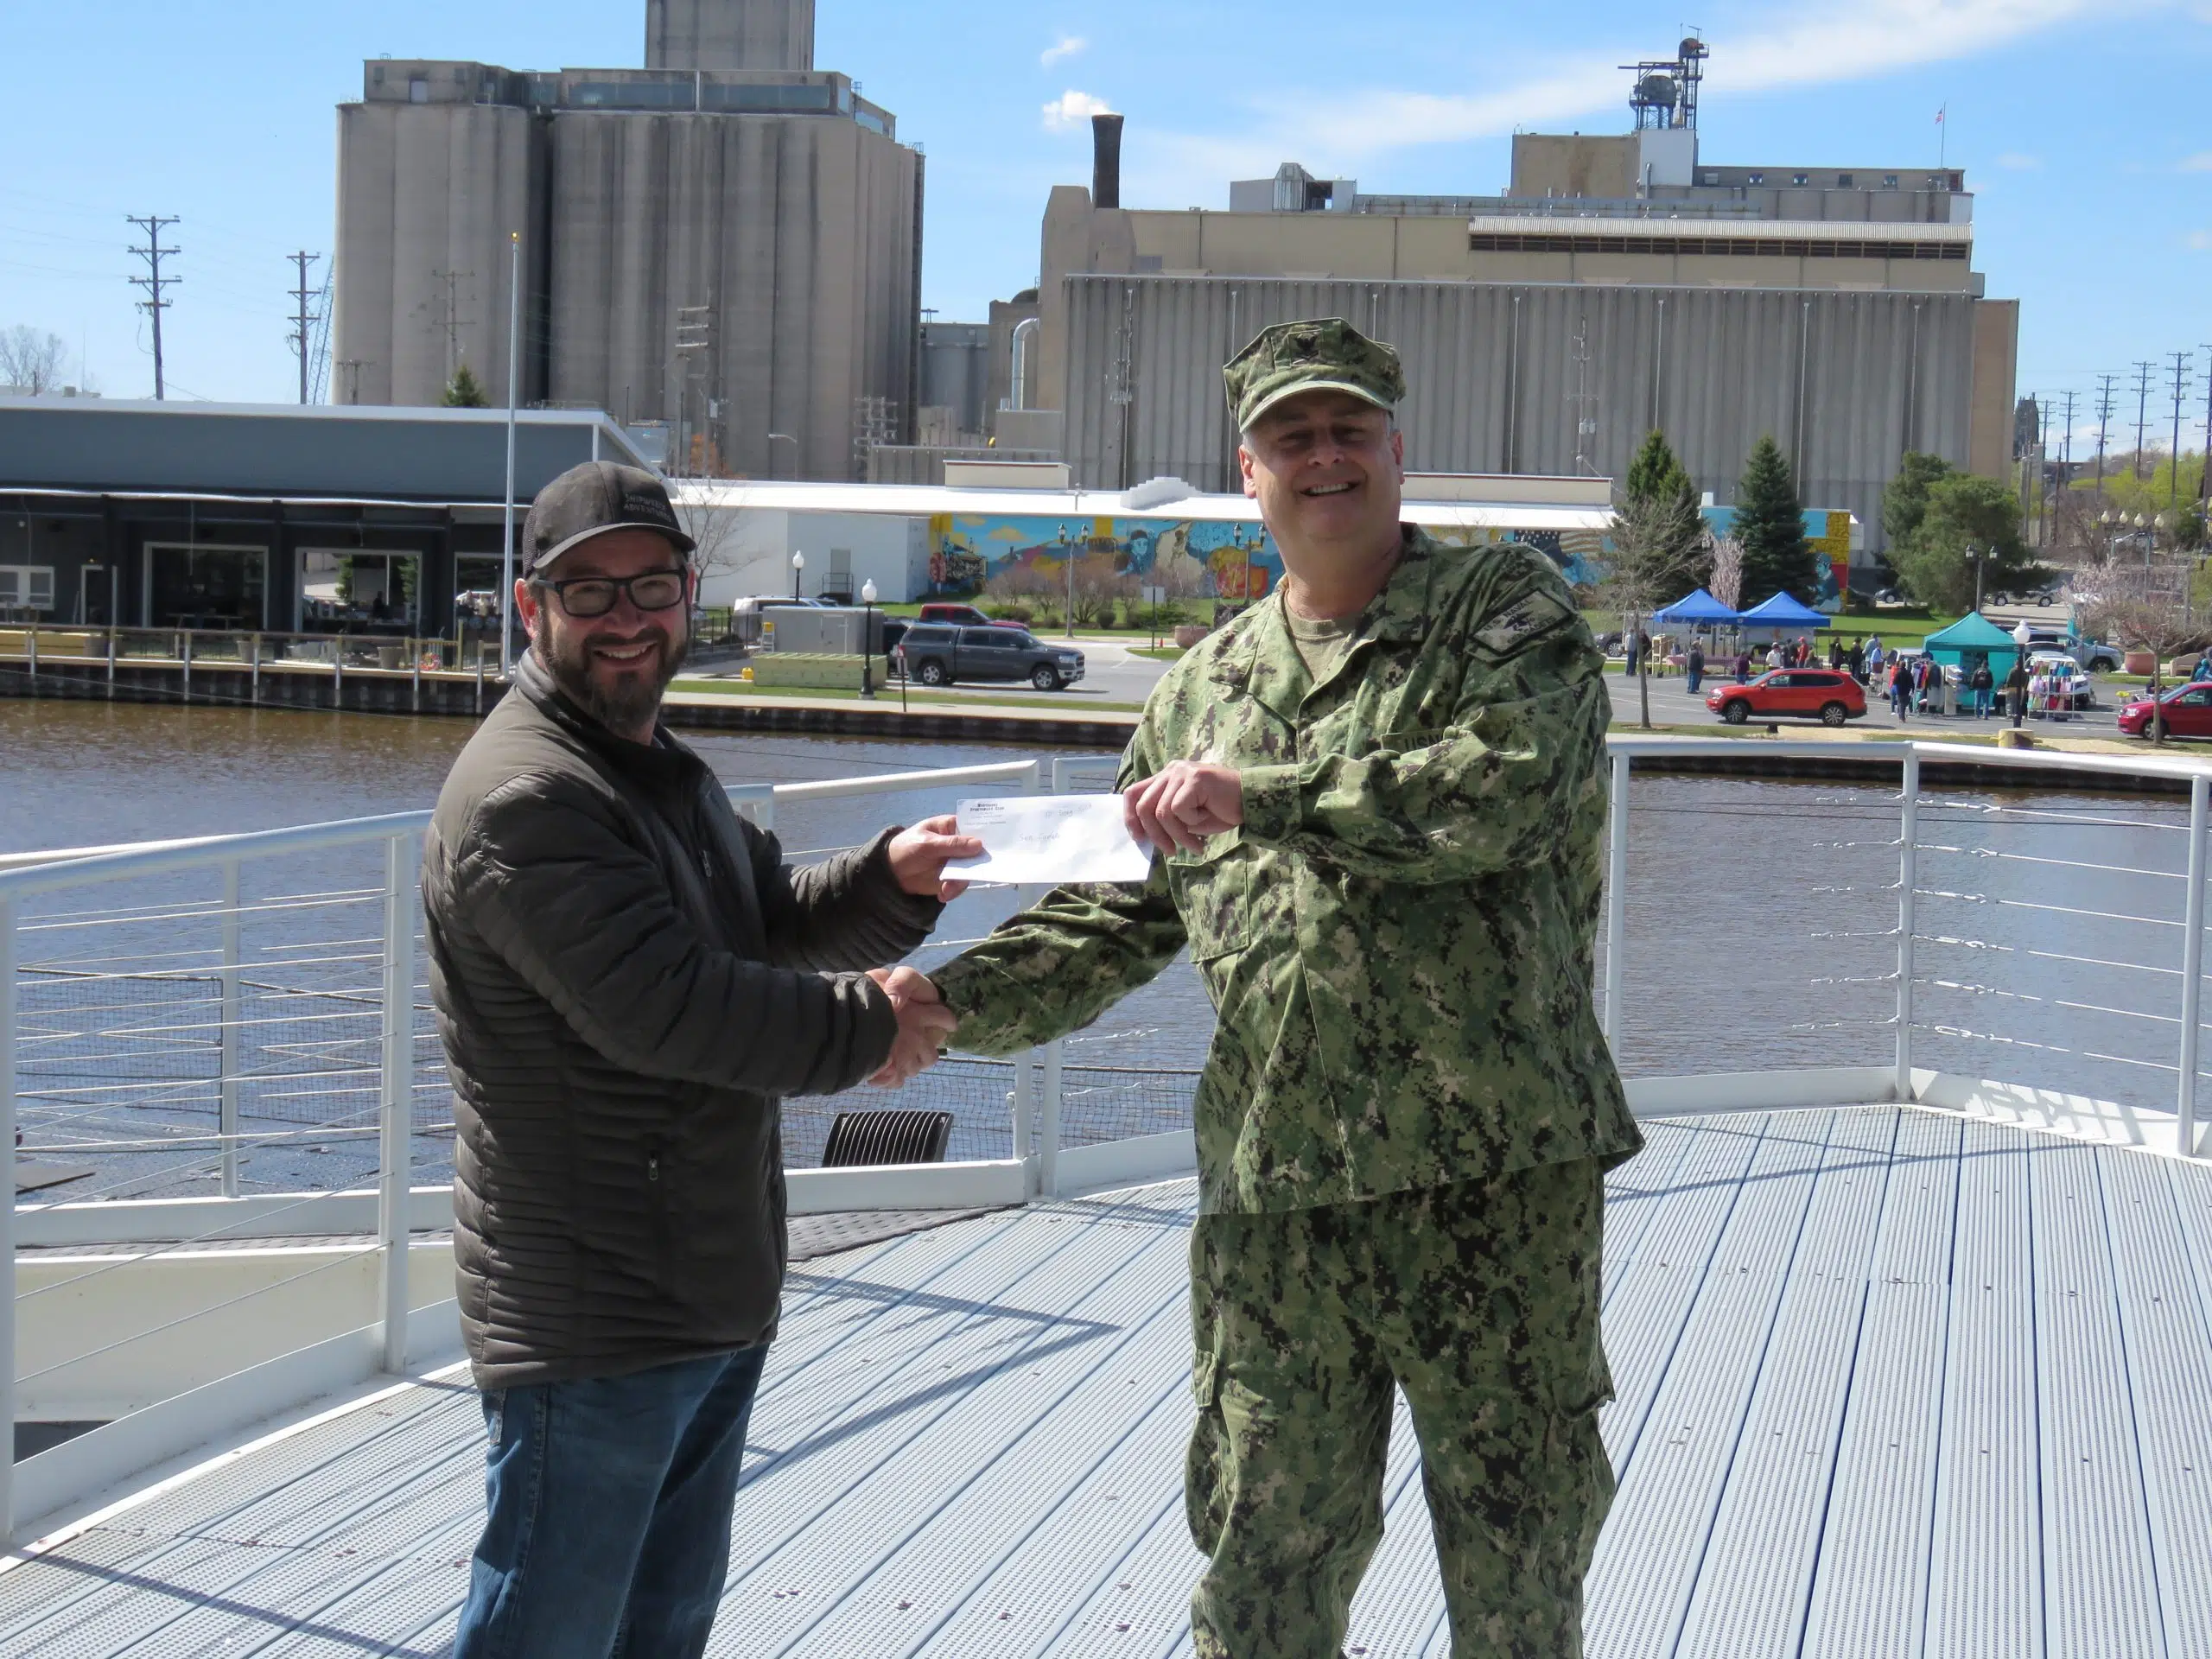 Local Sea Cadets Group Receives Donation from the West Shore Sportsman's Club